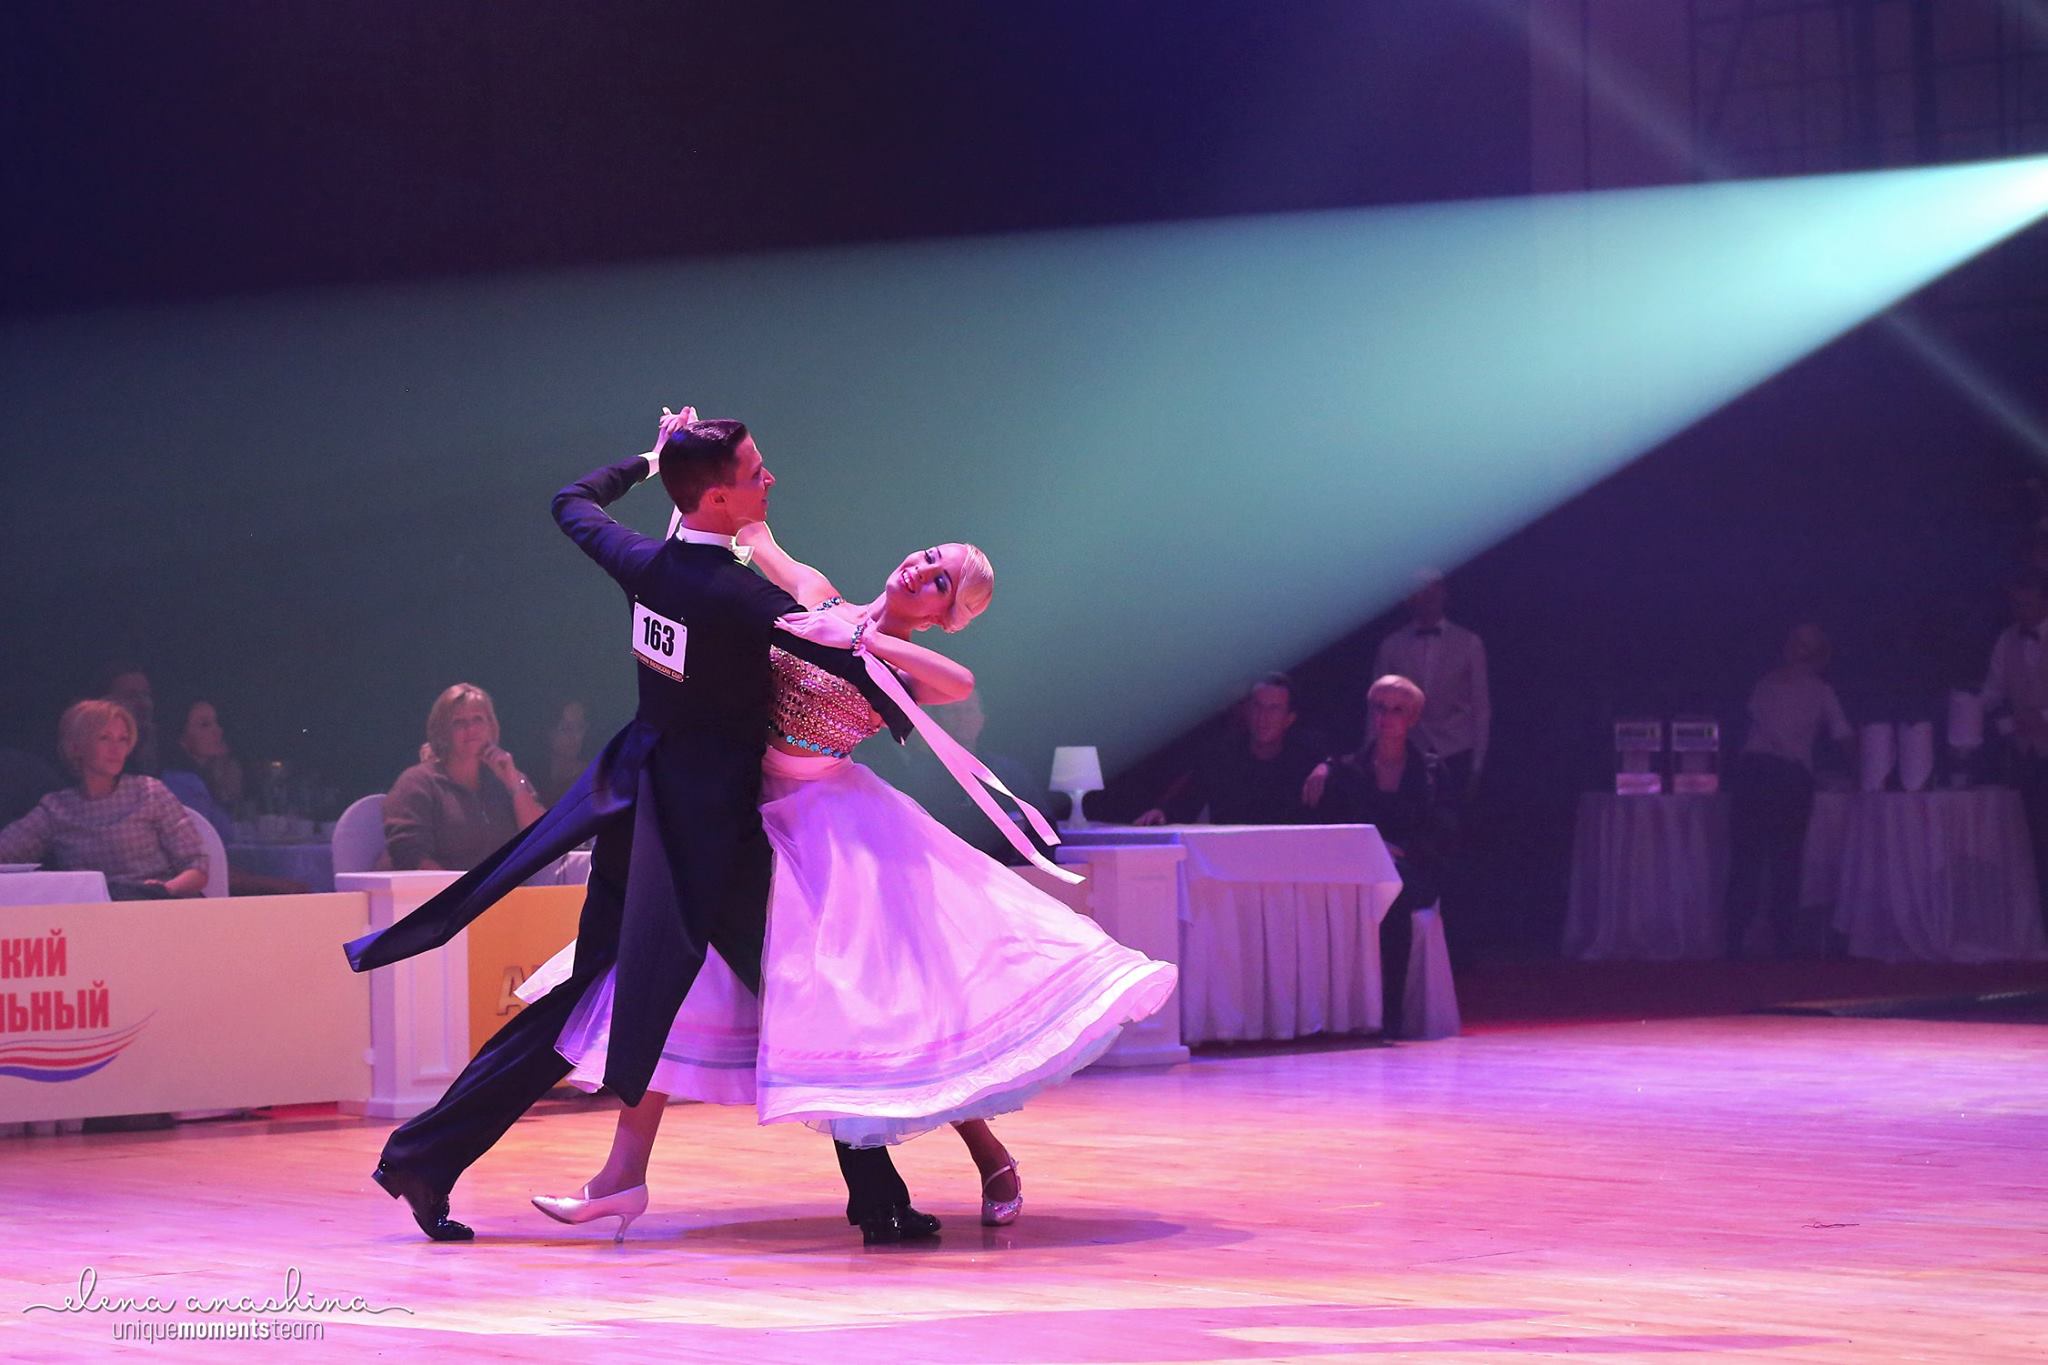 Image for the blog: What is International Ballroom Dance Style?